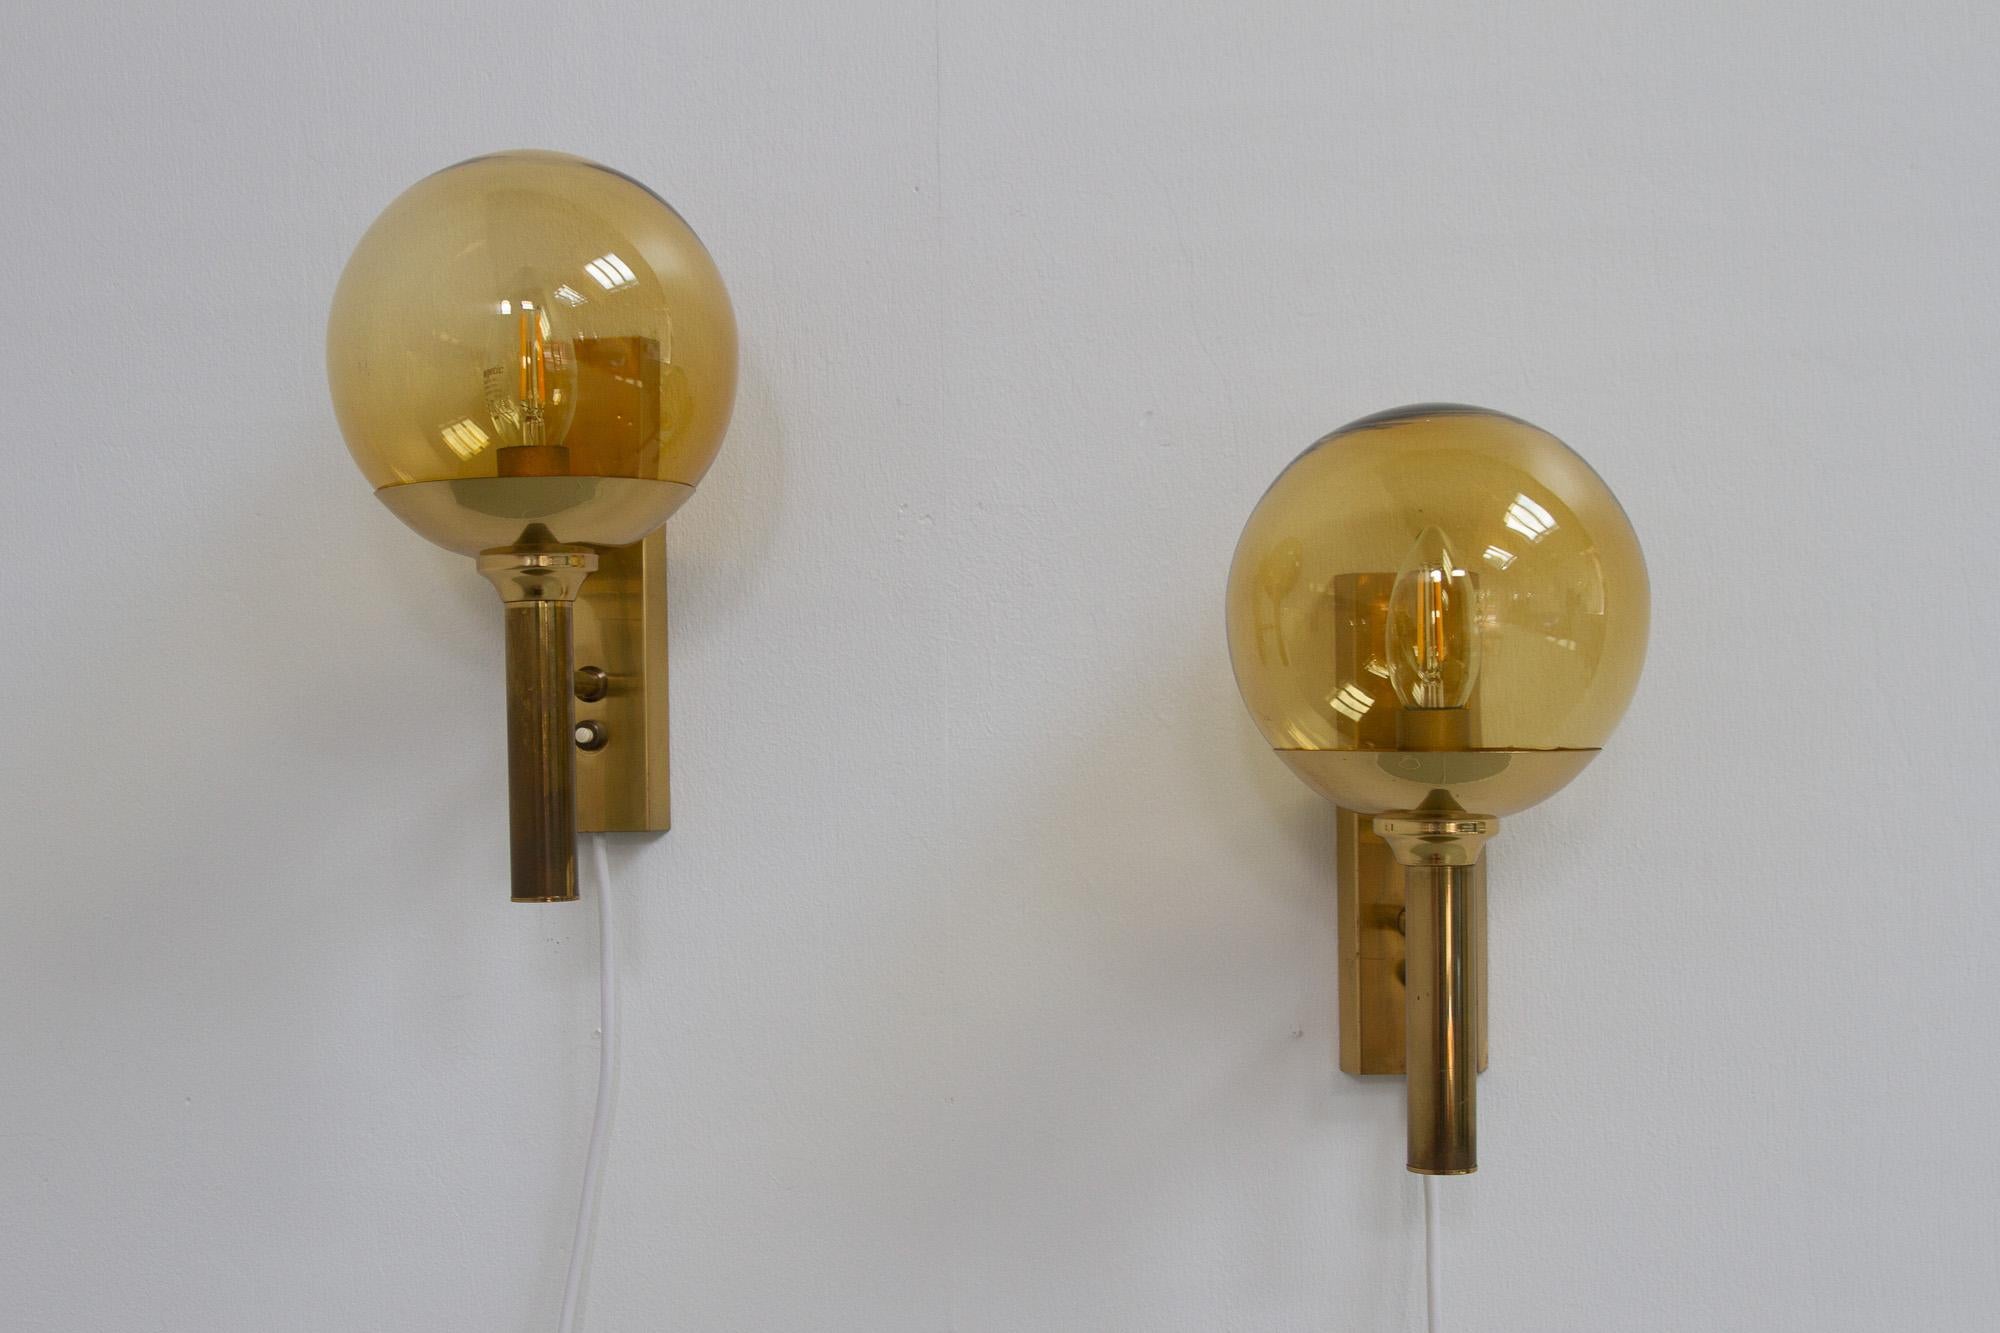 Vintage Brass Sconces by Sv. Mejlstrøm for Mejlstrøm Belysning, 1960s. Set of 2.
Brass wall lamp with hand blown shade in smoked glass designed by Svend Mejlstrøm for Mejlstrøm Belysning. Svend Mejlstrøm is from the same school and period as